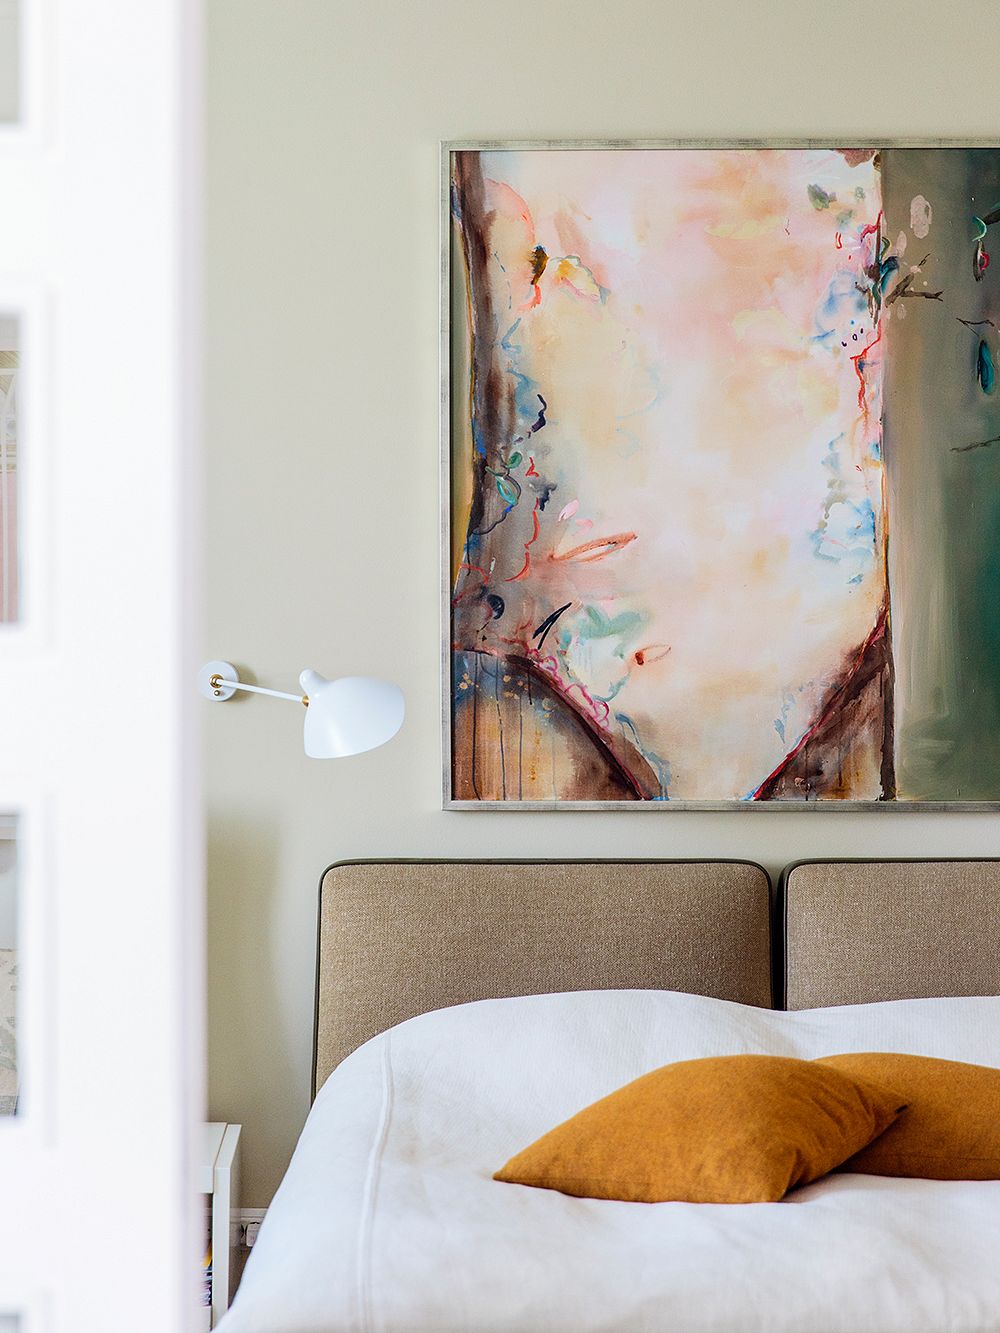 An image of a bedroom: a bed, some throw pillows, a wall lamp, a painting on the wall.